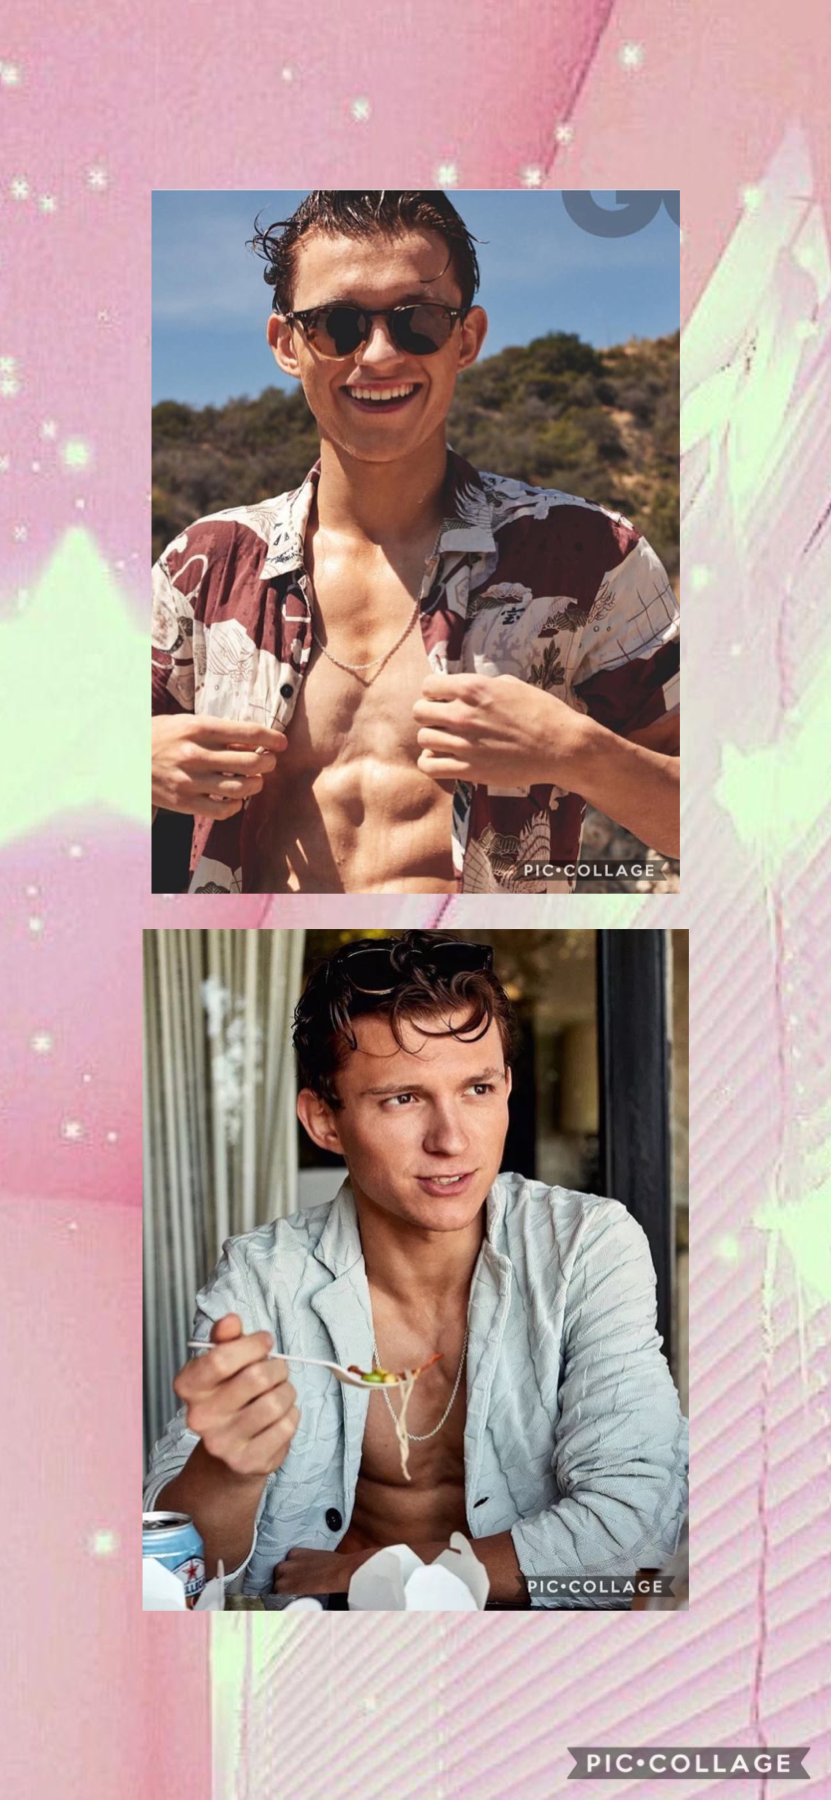 🌸Tap🌸
Tom Holland
Hot or not?